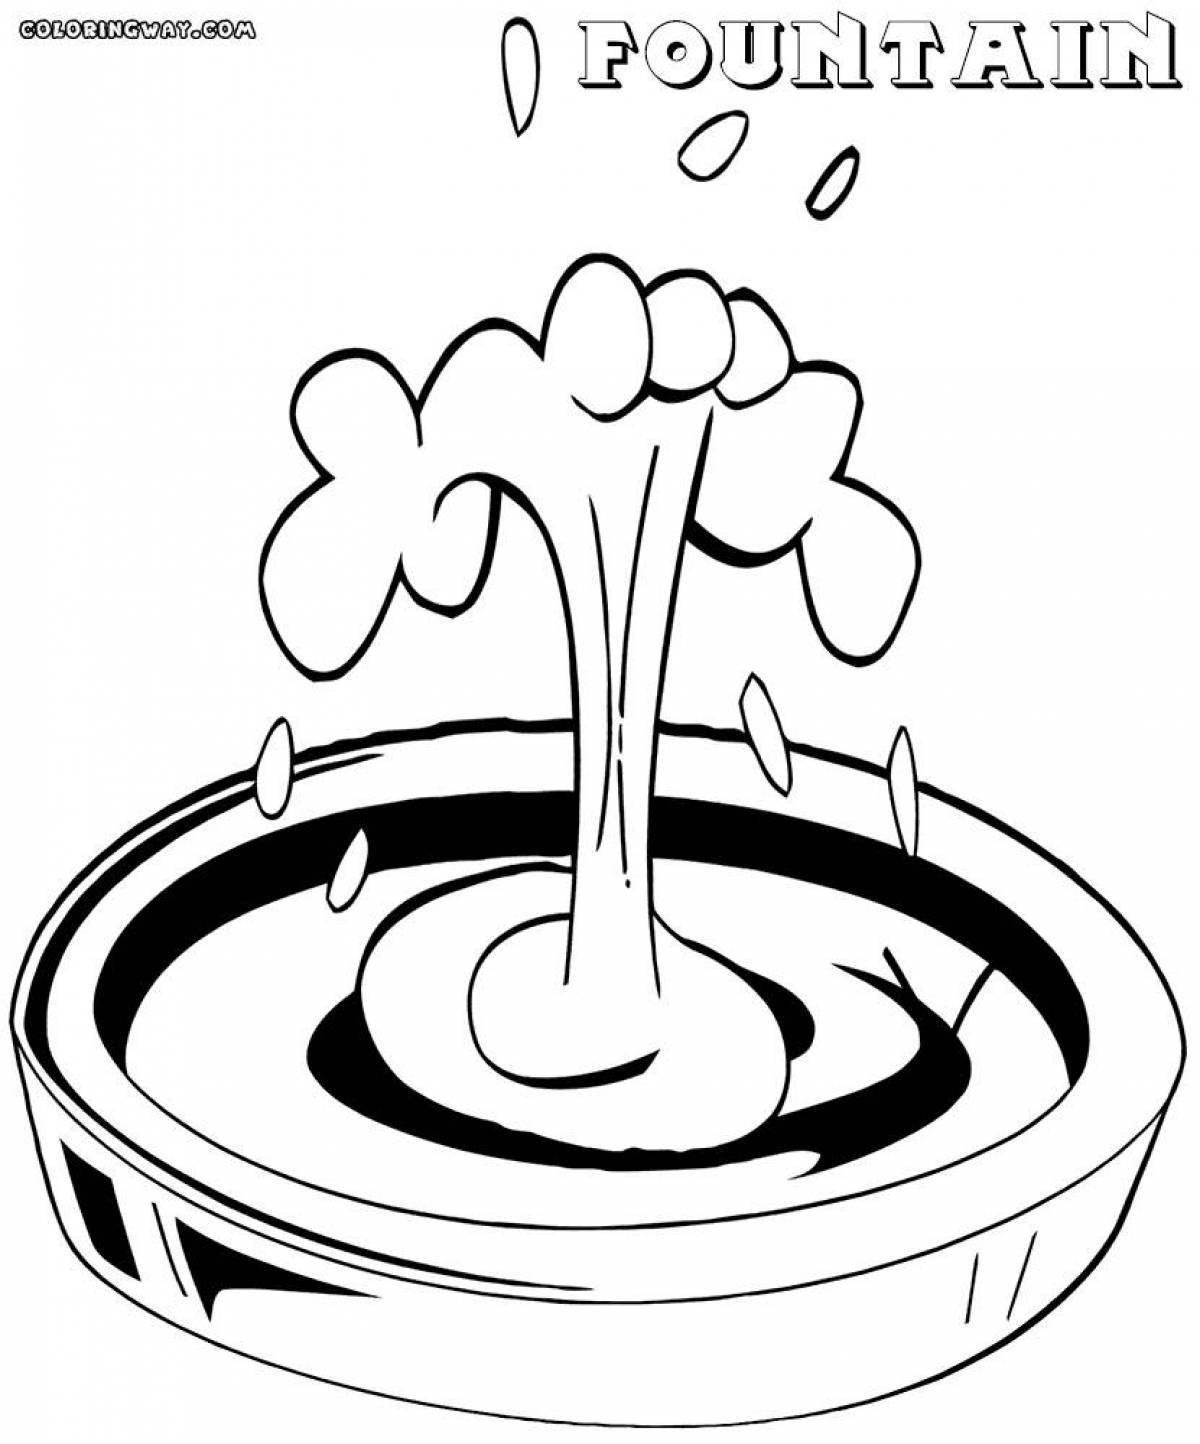 Amazing fountain coloring page